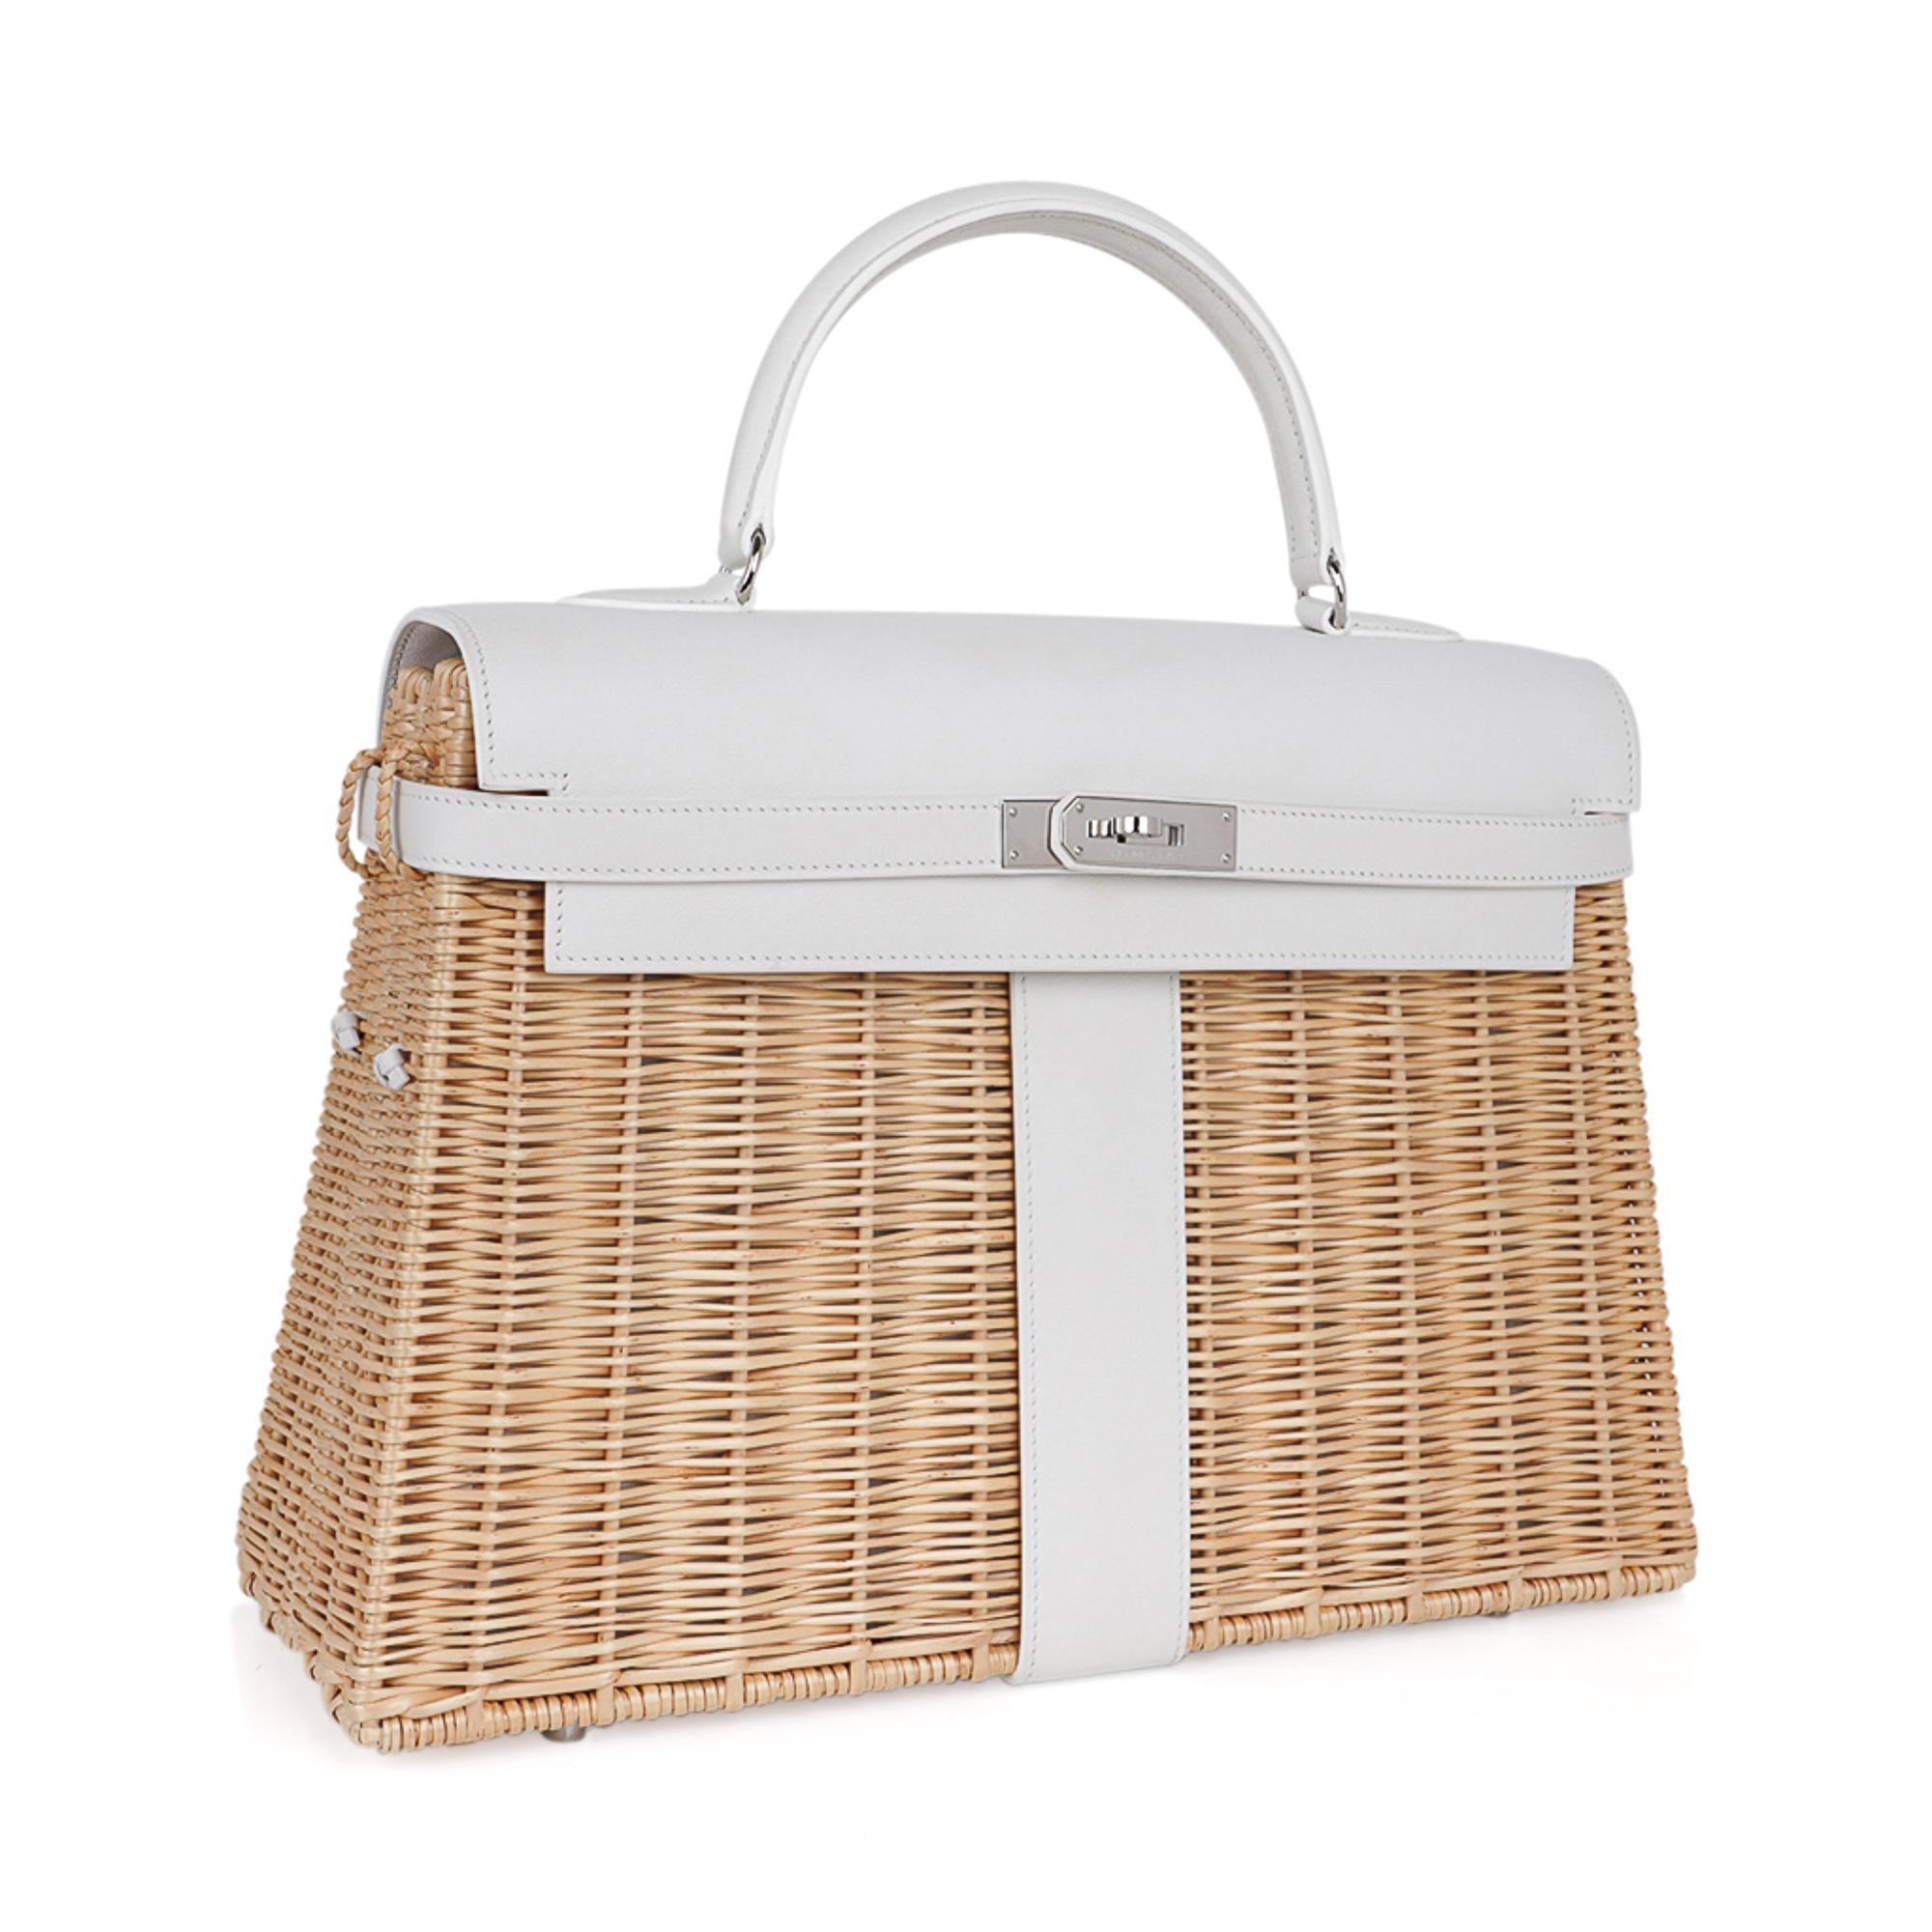 Mightychic offers a Limited Edition Hermes Kelly Picnic bag featured in Osier Wicker and White Swift leather.
This rare collectors bag remains a sought after treasure.
Crisp and fresh with Palladium hardware.
Very like new condition.
Very light